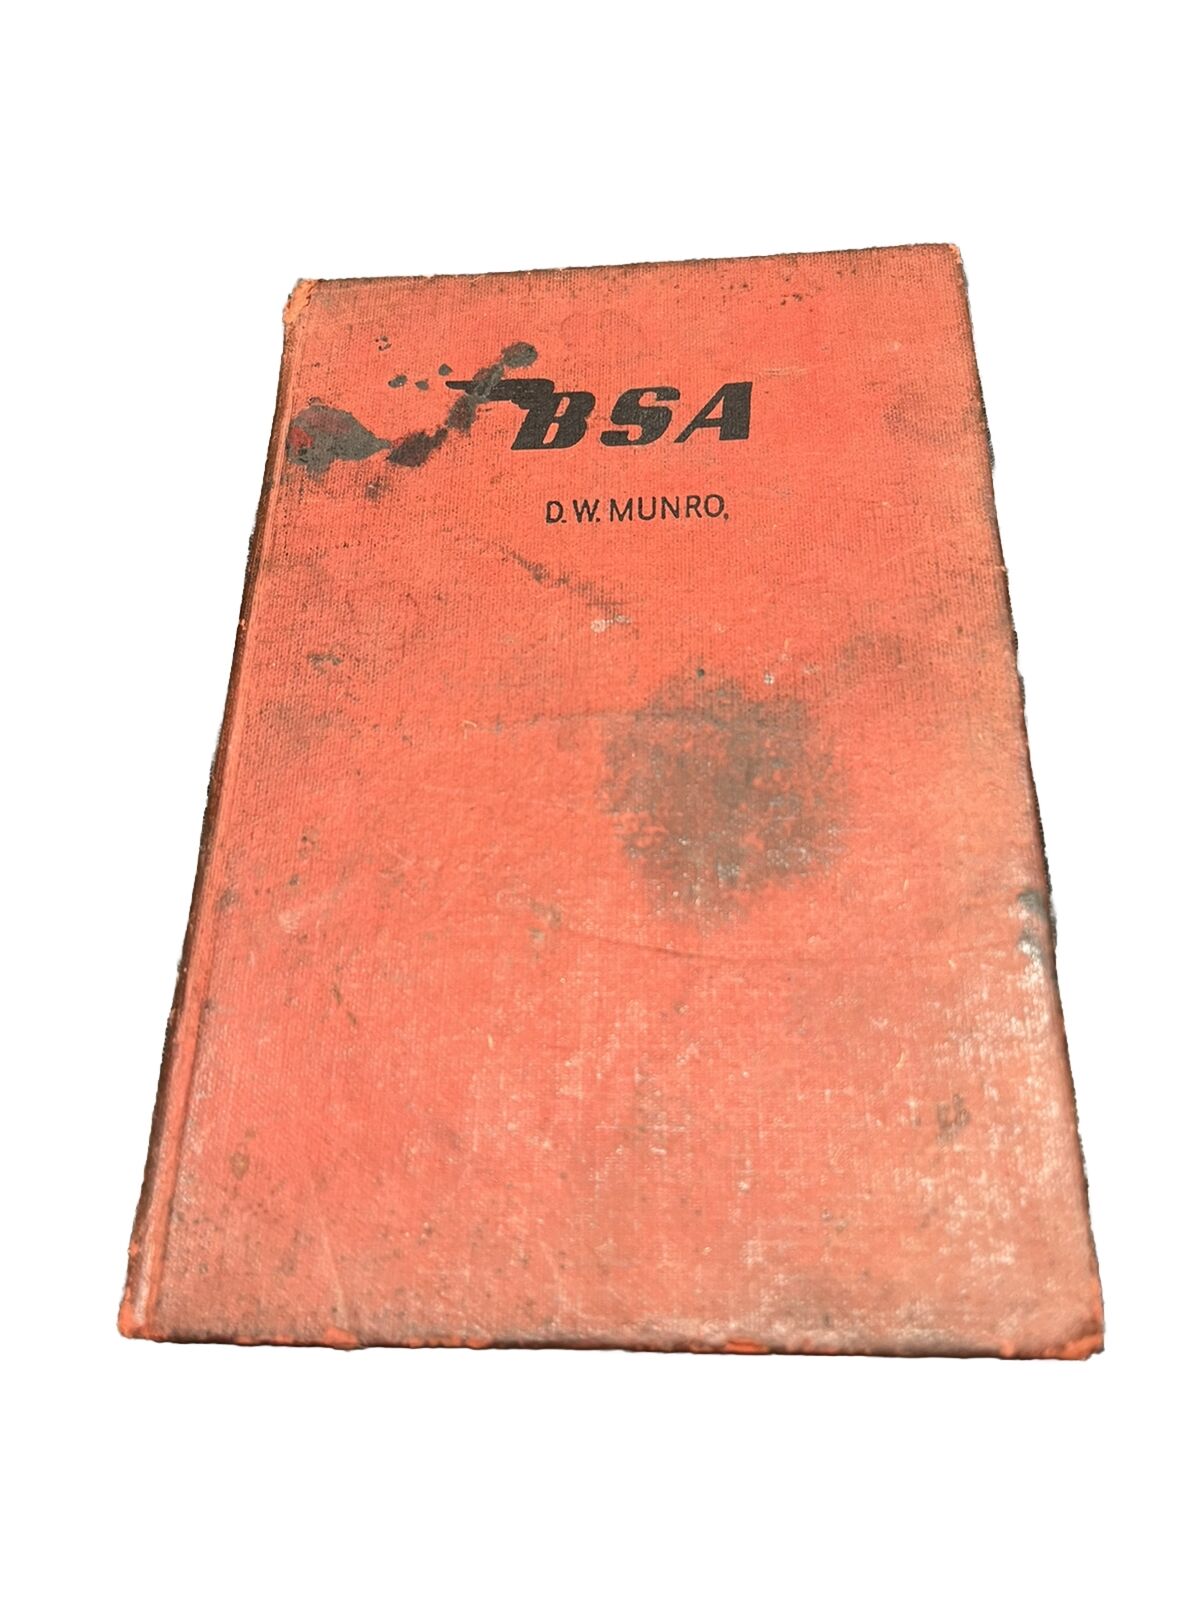 BSA Motor Cycles by Pearson Covering All Models 1931 - 1949 2nd Edition 1949 HC